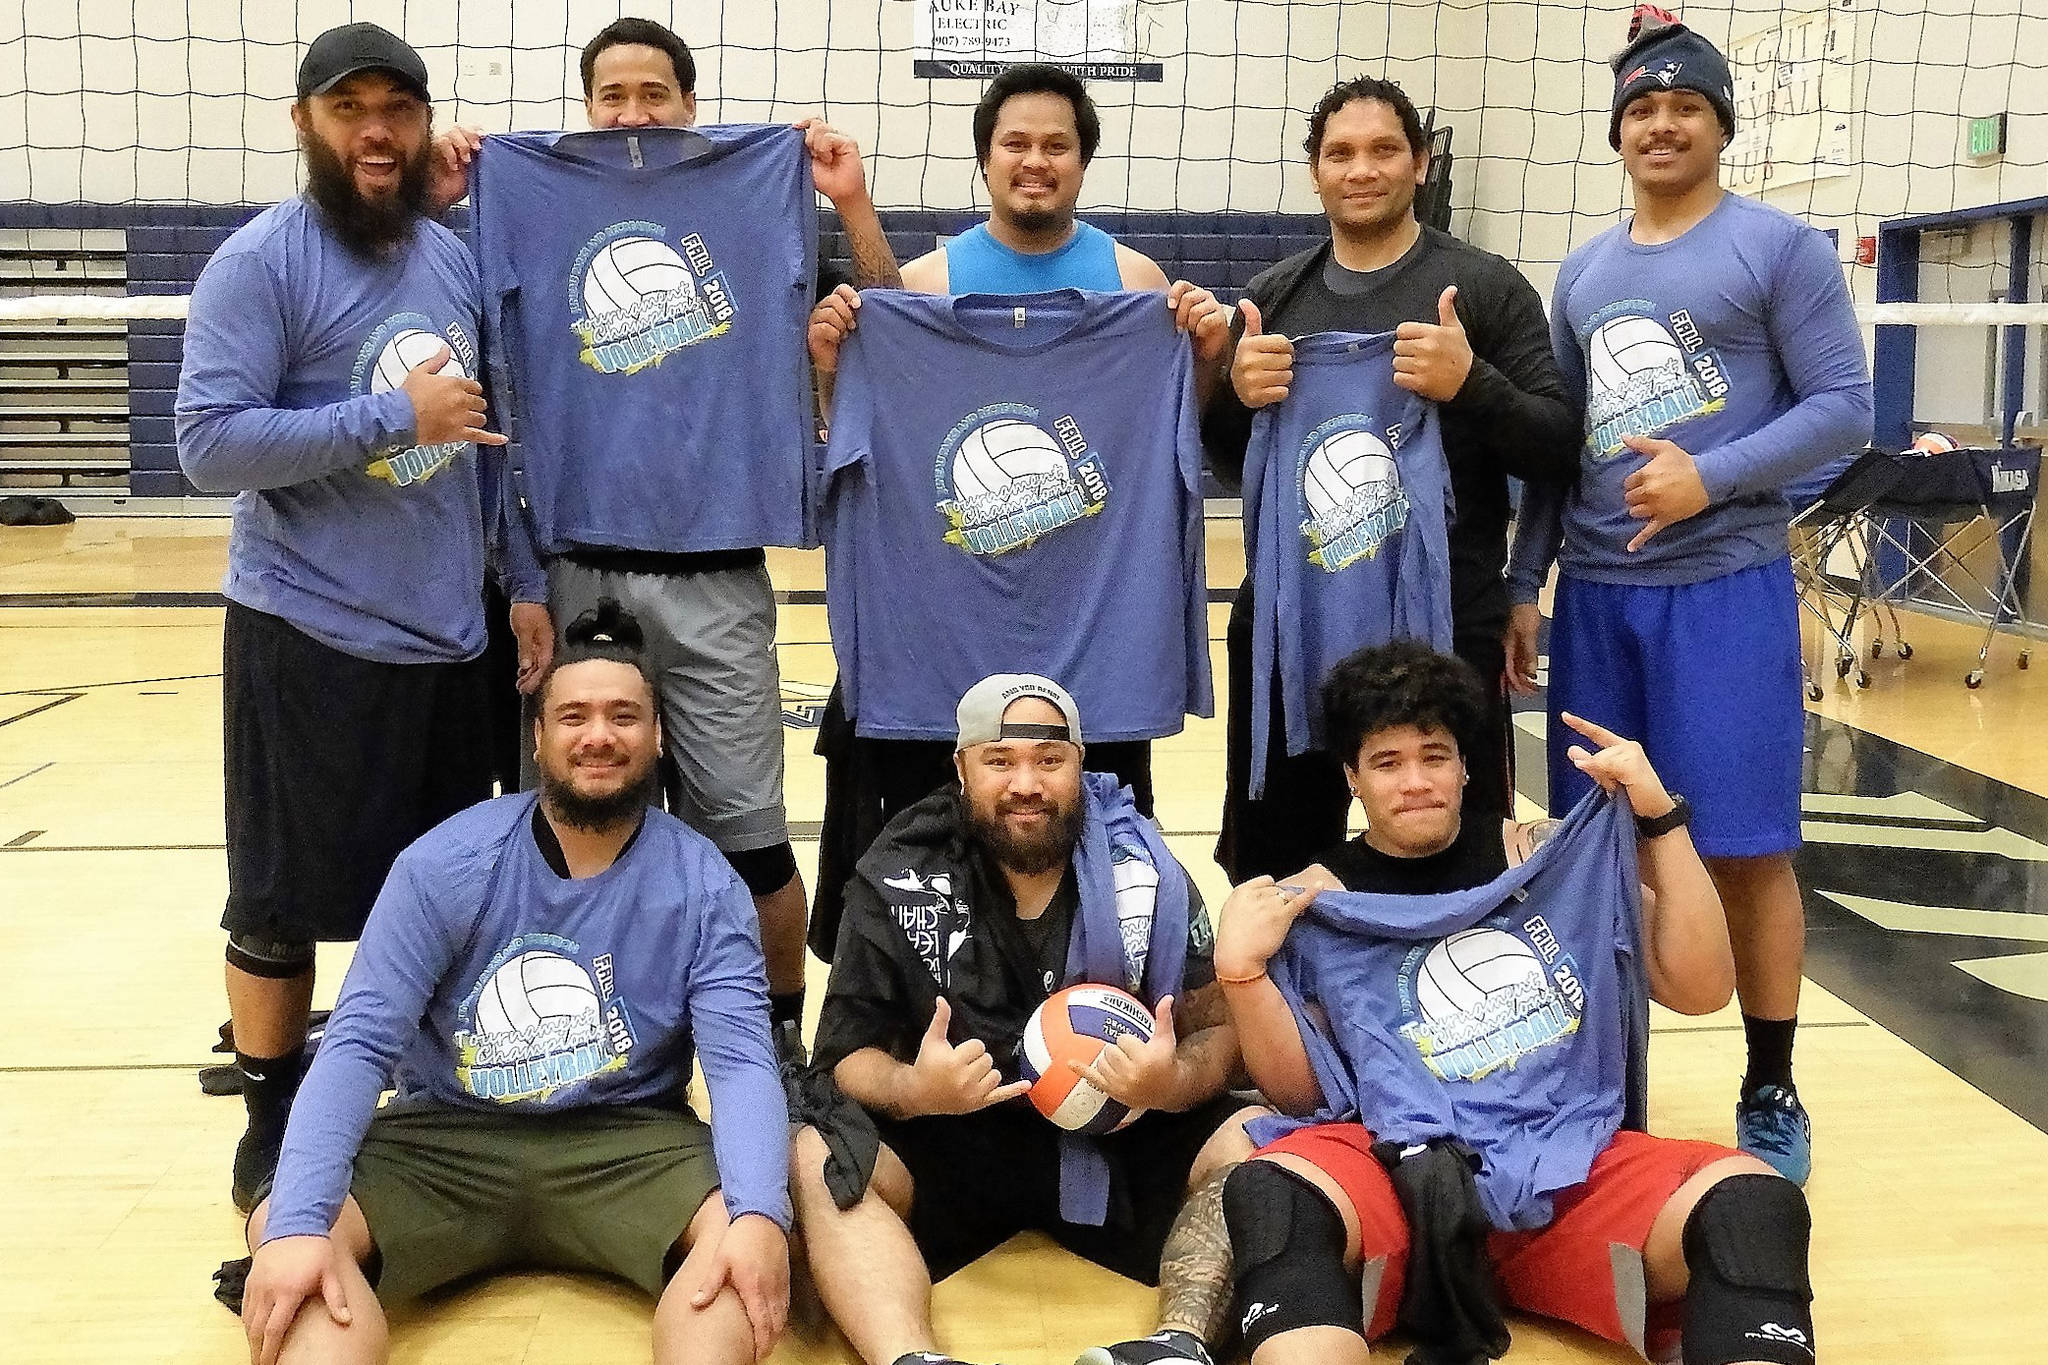 The Juneau Parks and Recreation Men’s Division 1 Champions: Island Sons. (Courtesy Photo | Parks and Recreation)